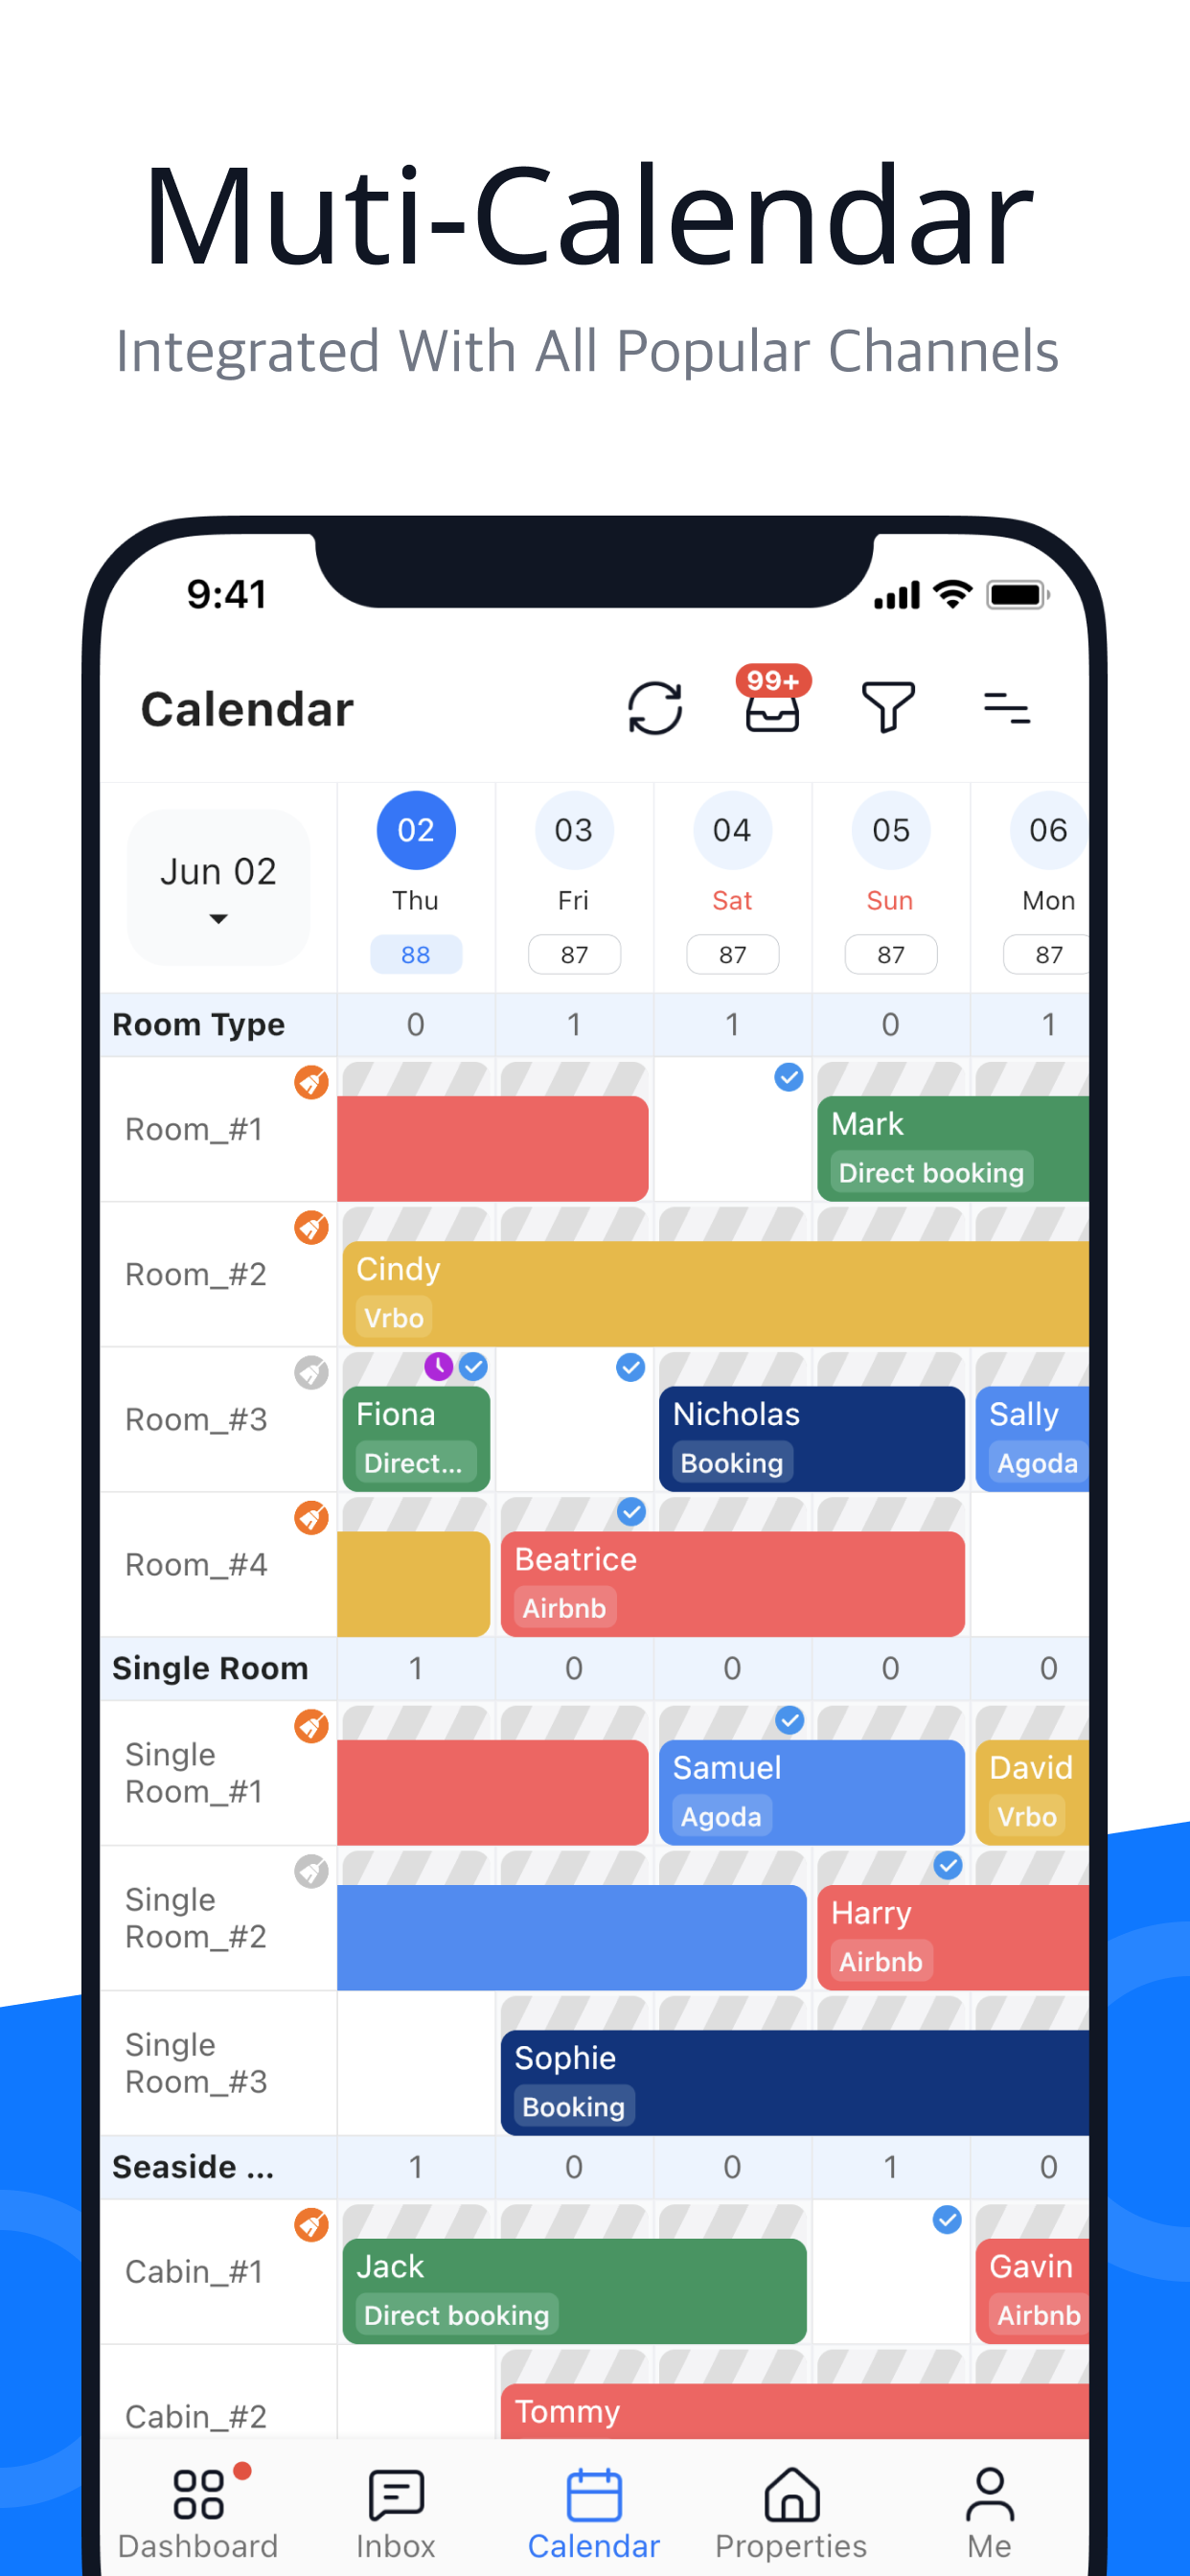 Hostex syncs the calendars, reservations, prices from all your booking channels in one dashboard.